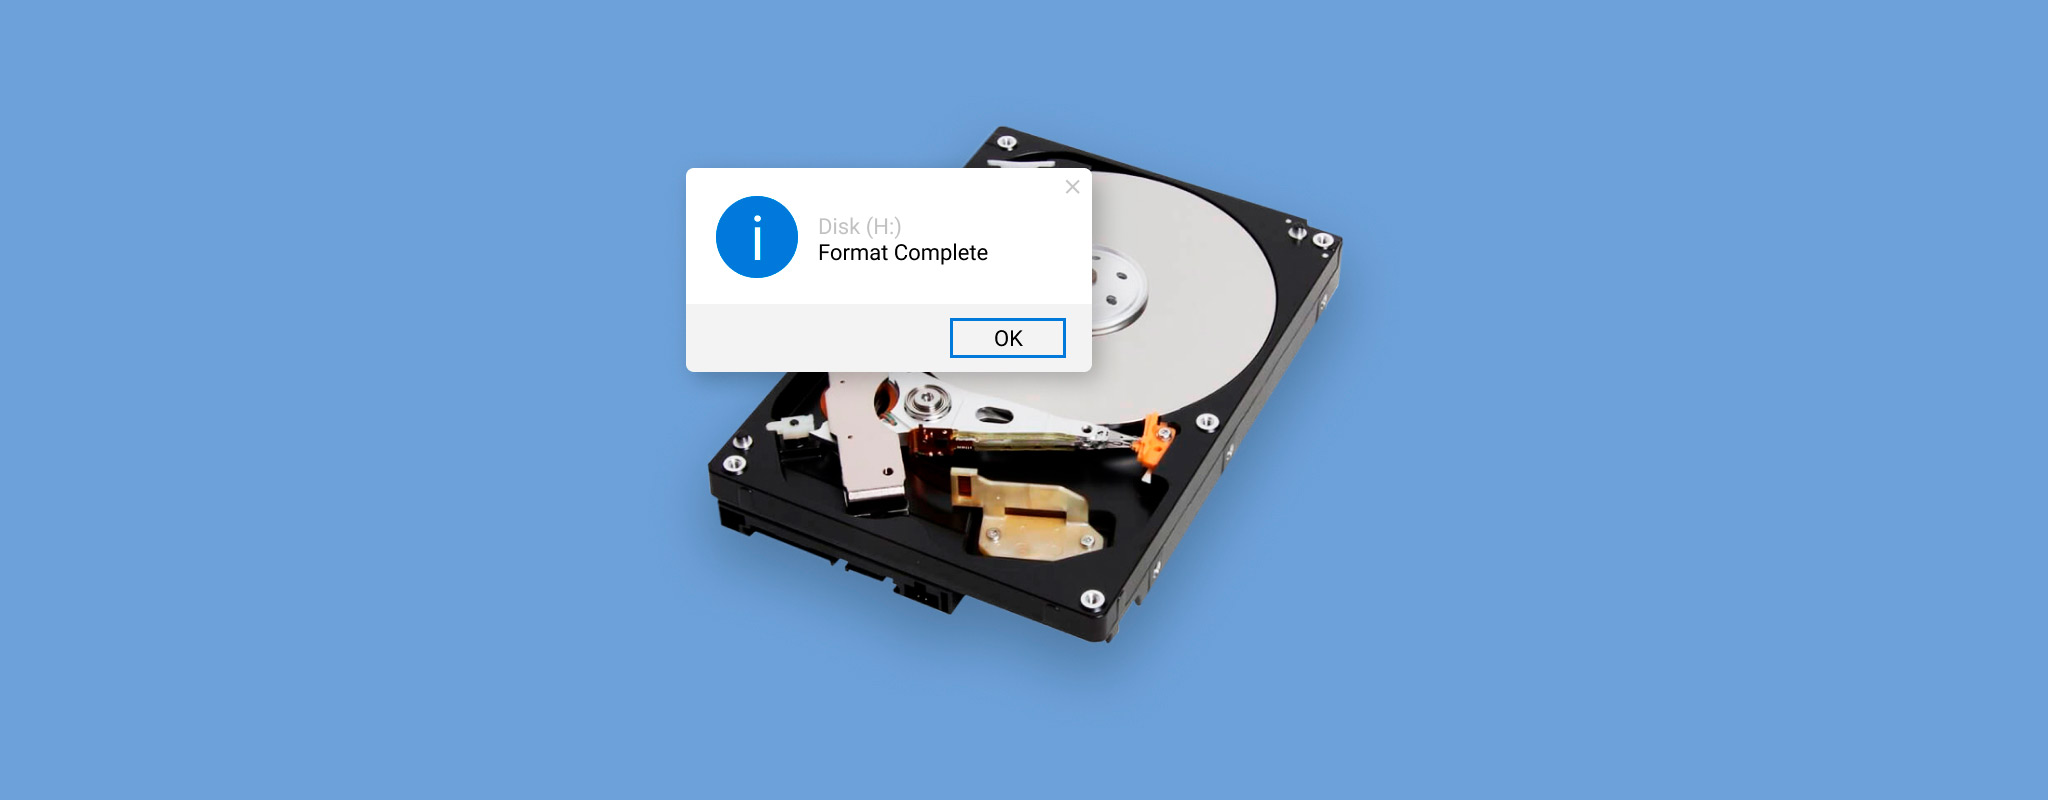 Recover files from formatted hard drive